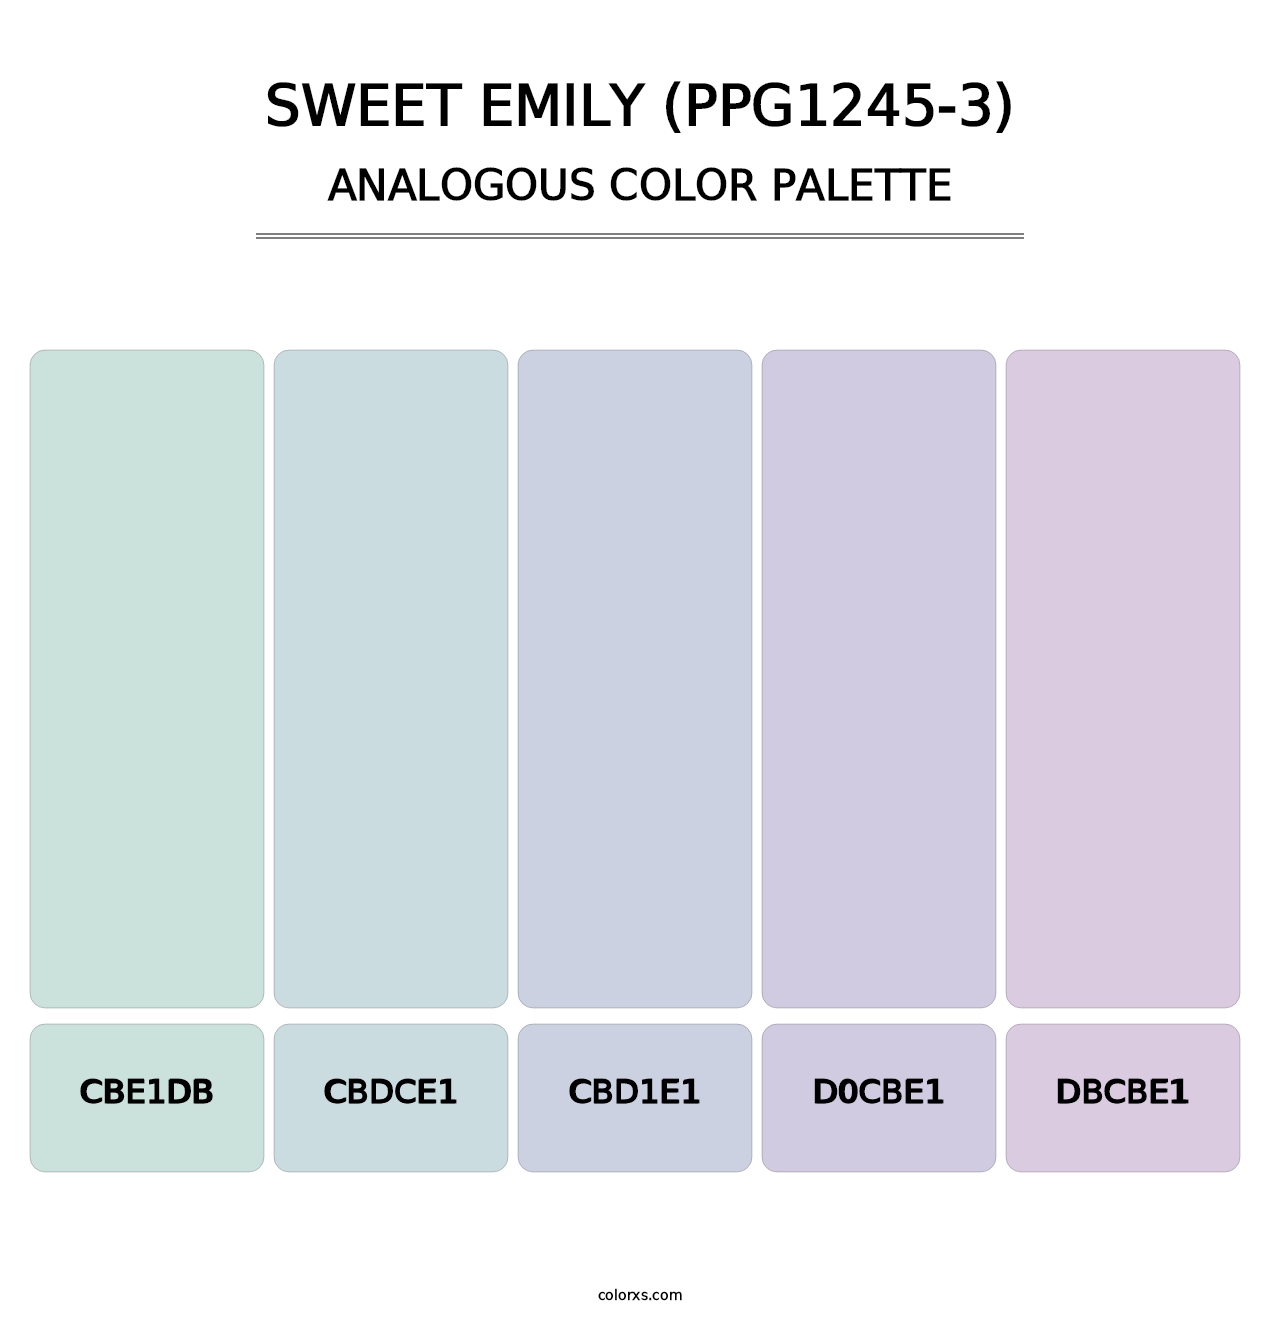 Sweet Emily (PPG1245-3) - Analogous Color Palette